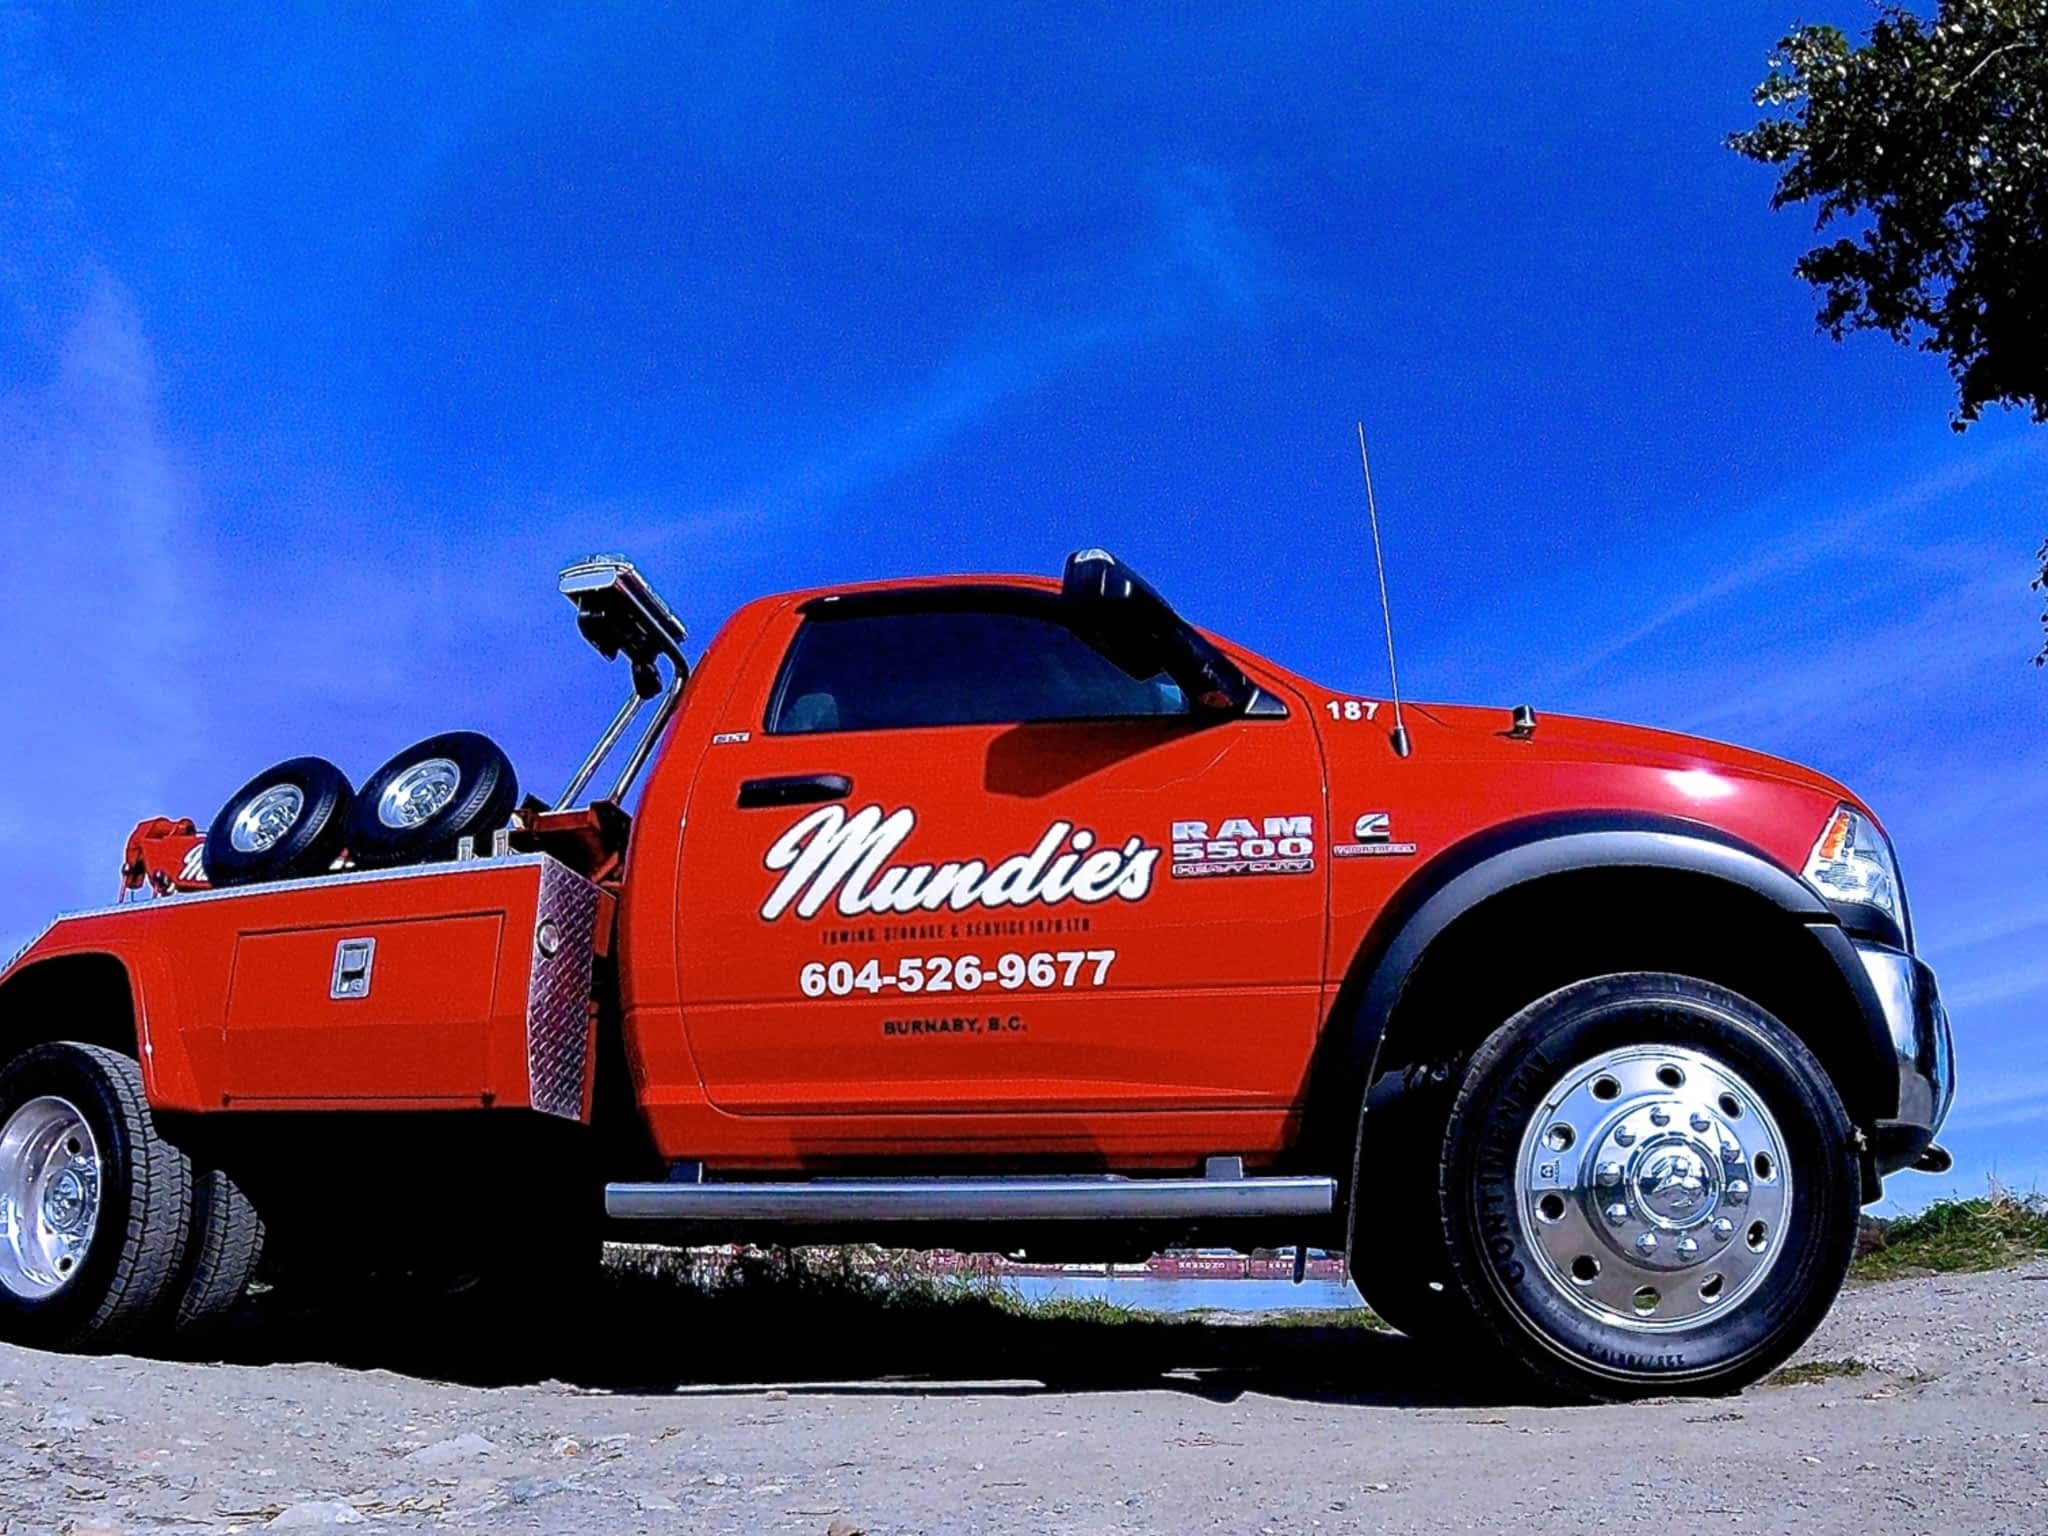 photo Mundies Towing and Recovery